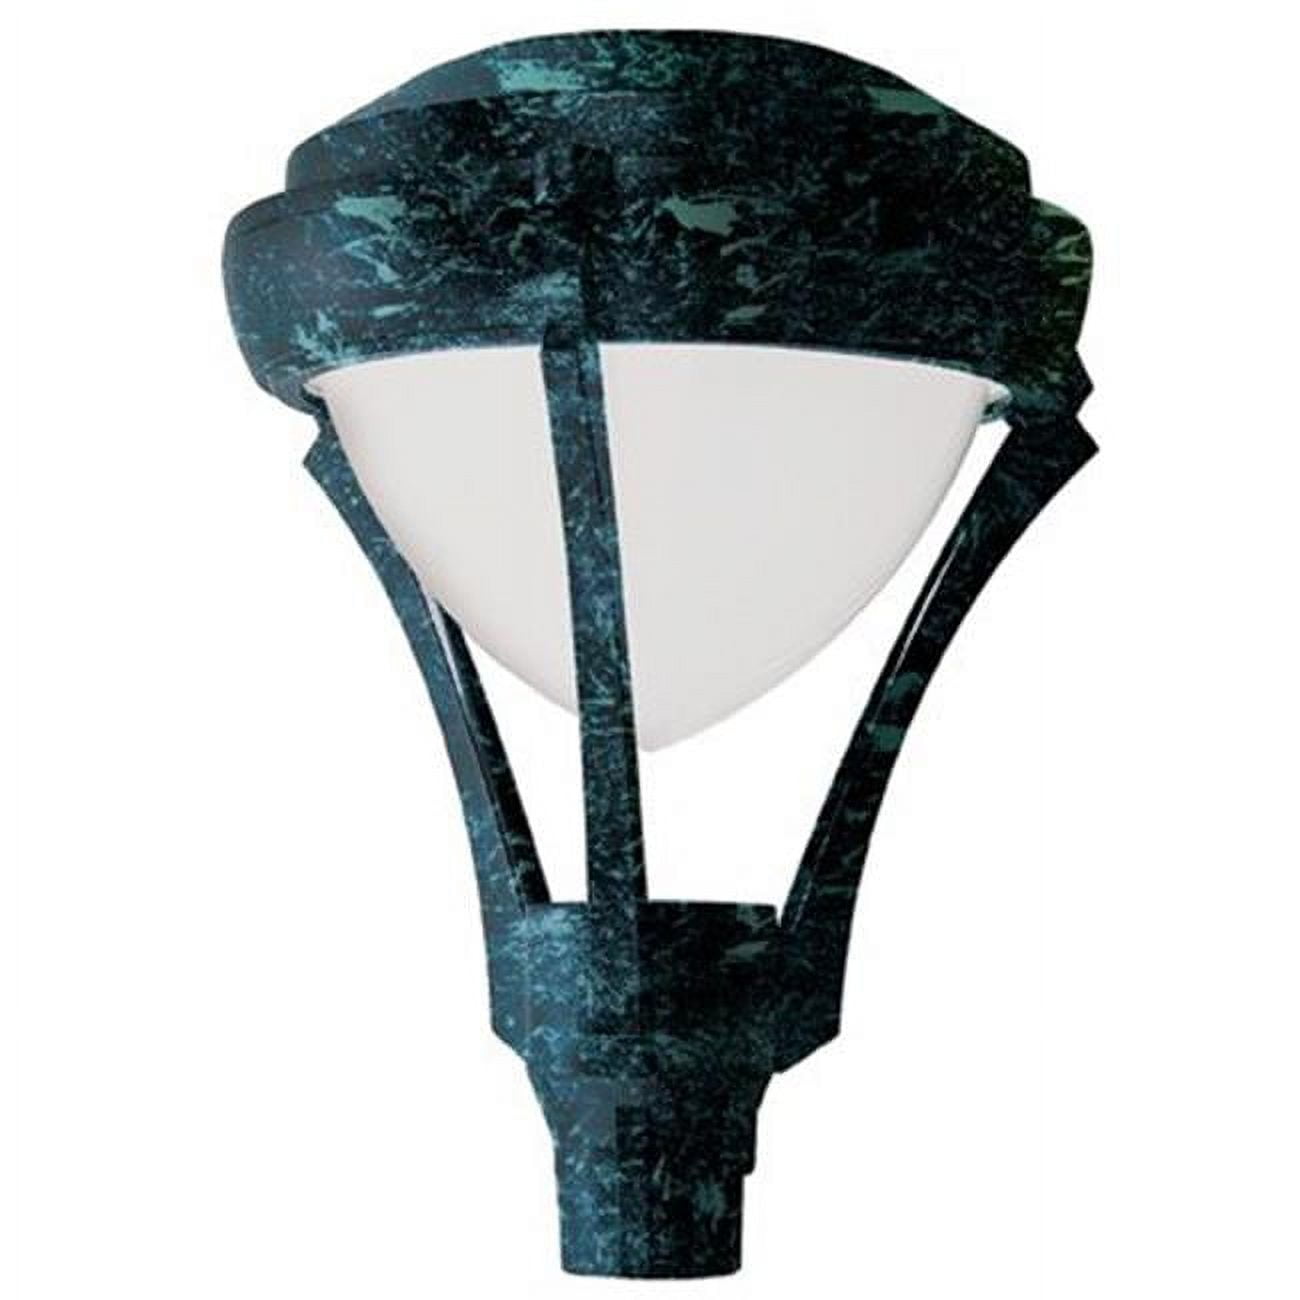 Picture of Dabmar Lighting GM593-VG-MT 120W Powder Coated Cast Aluminum Post Top Light Fixture with High Pressure Sodium Lamp, Verde Green